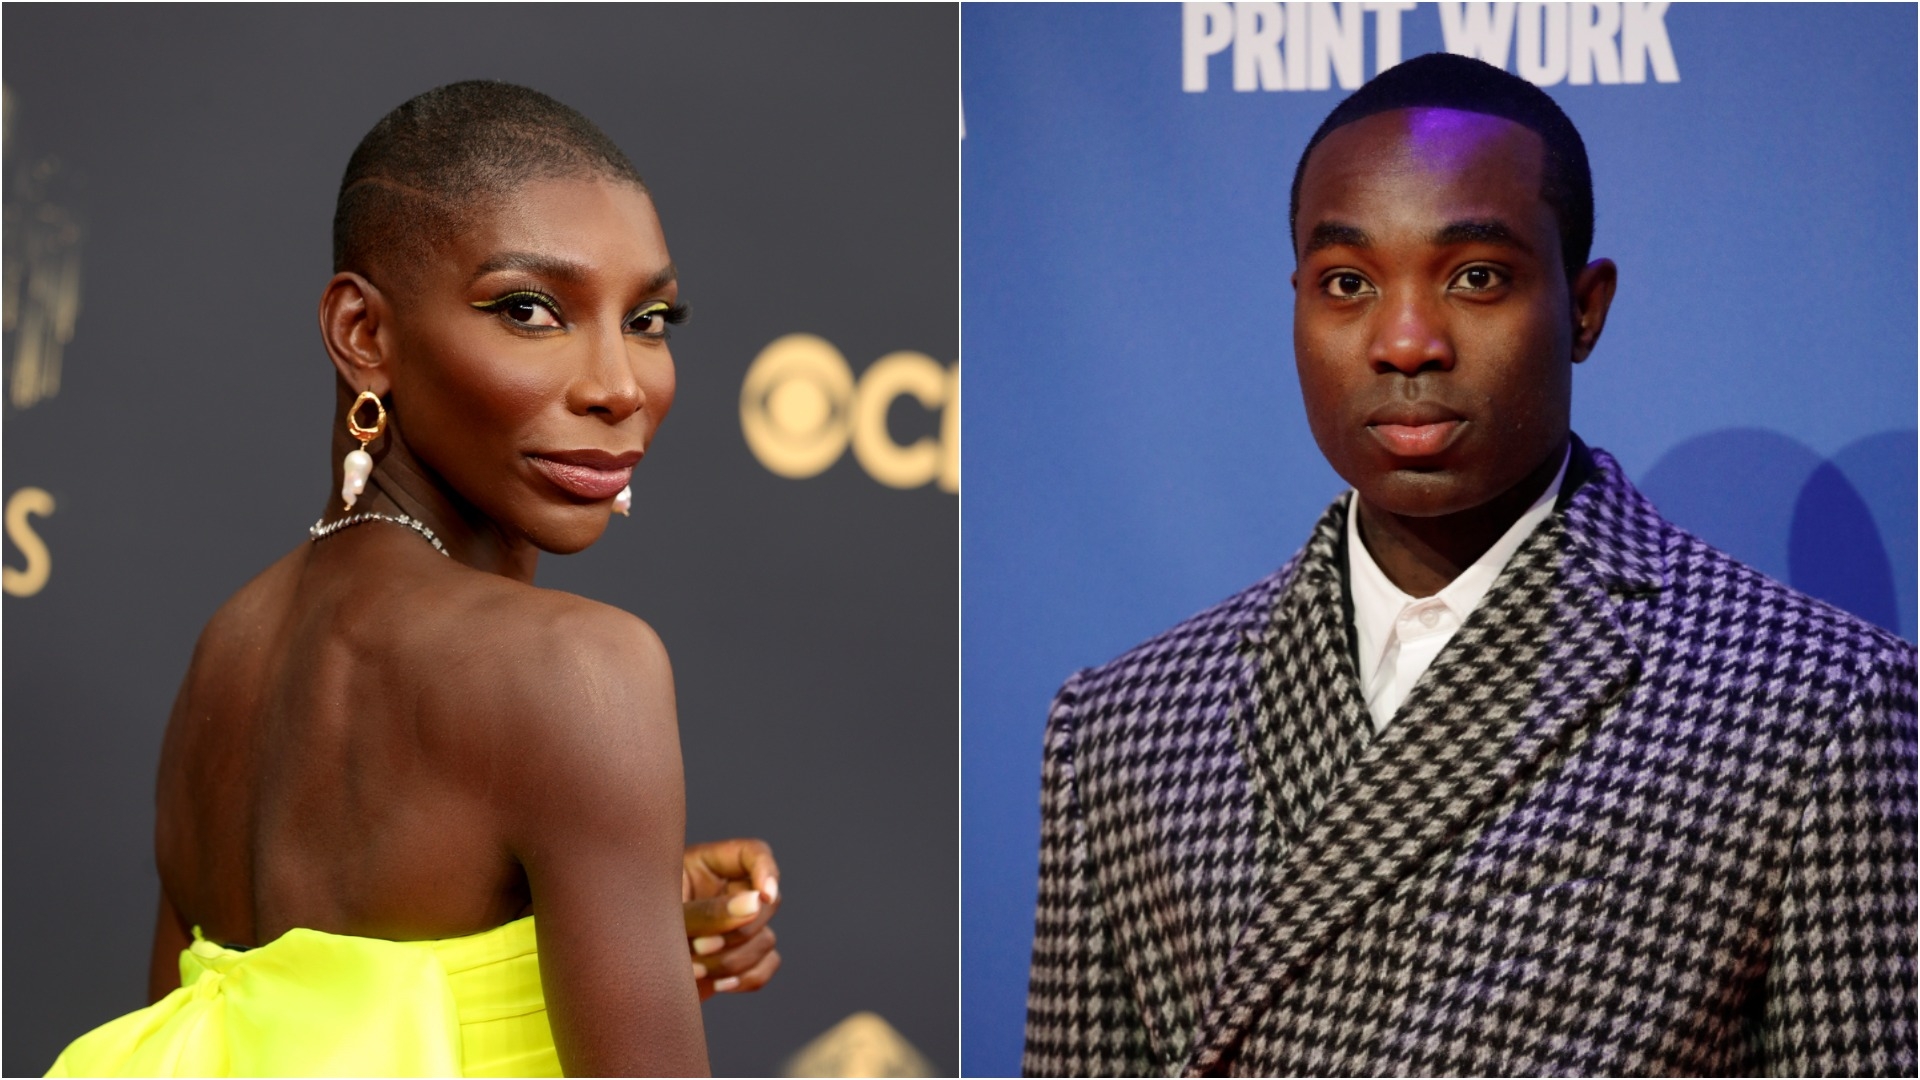 I May Destroy You‘s Michaela Coel and Paapa Essiedu receive apology from drama school for “appalling” racism